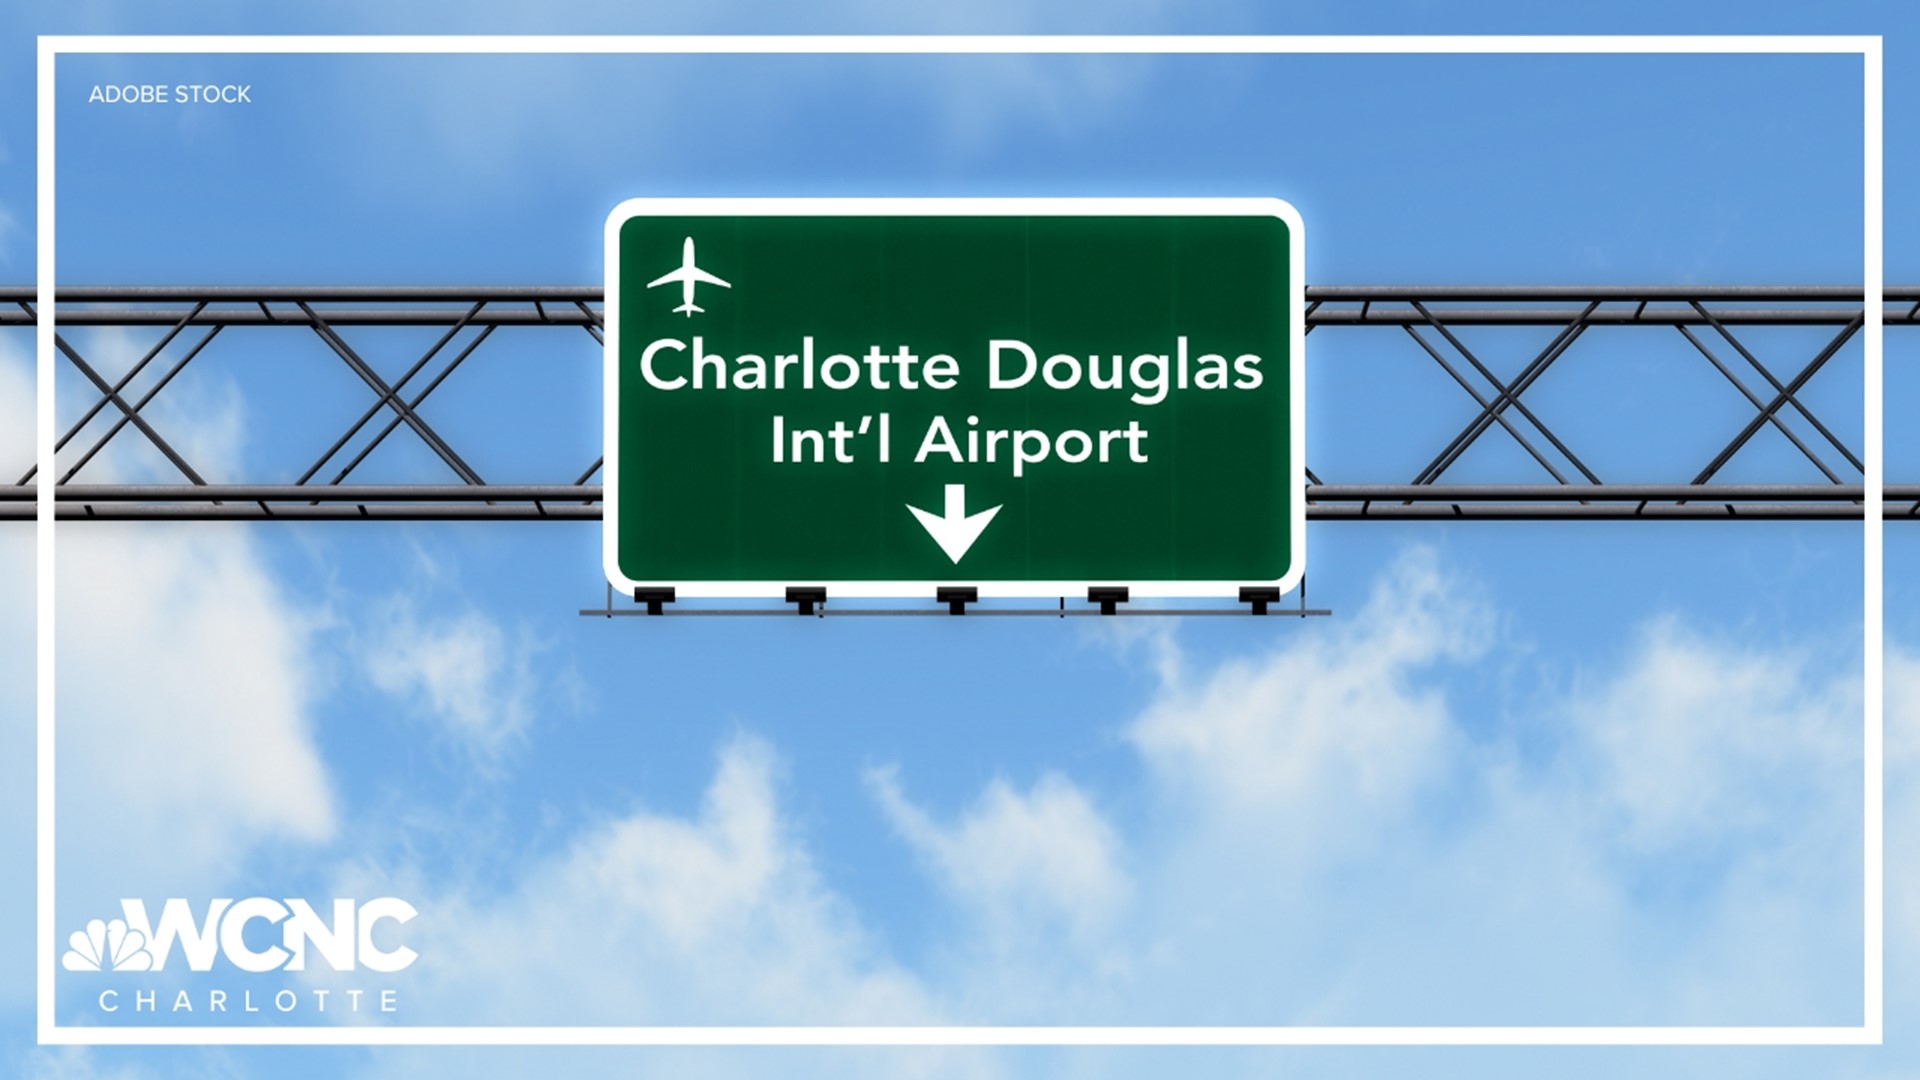 Airport officials plan to build hotels, restaurants and shops right next the Charlotte Douglas Airport.